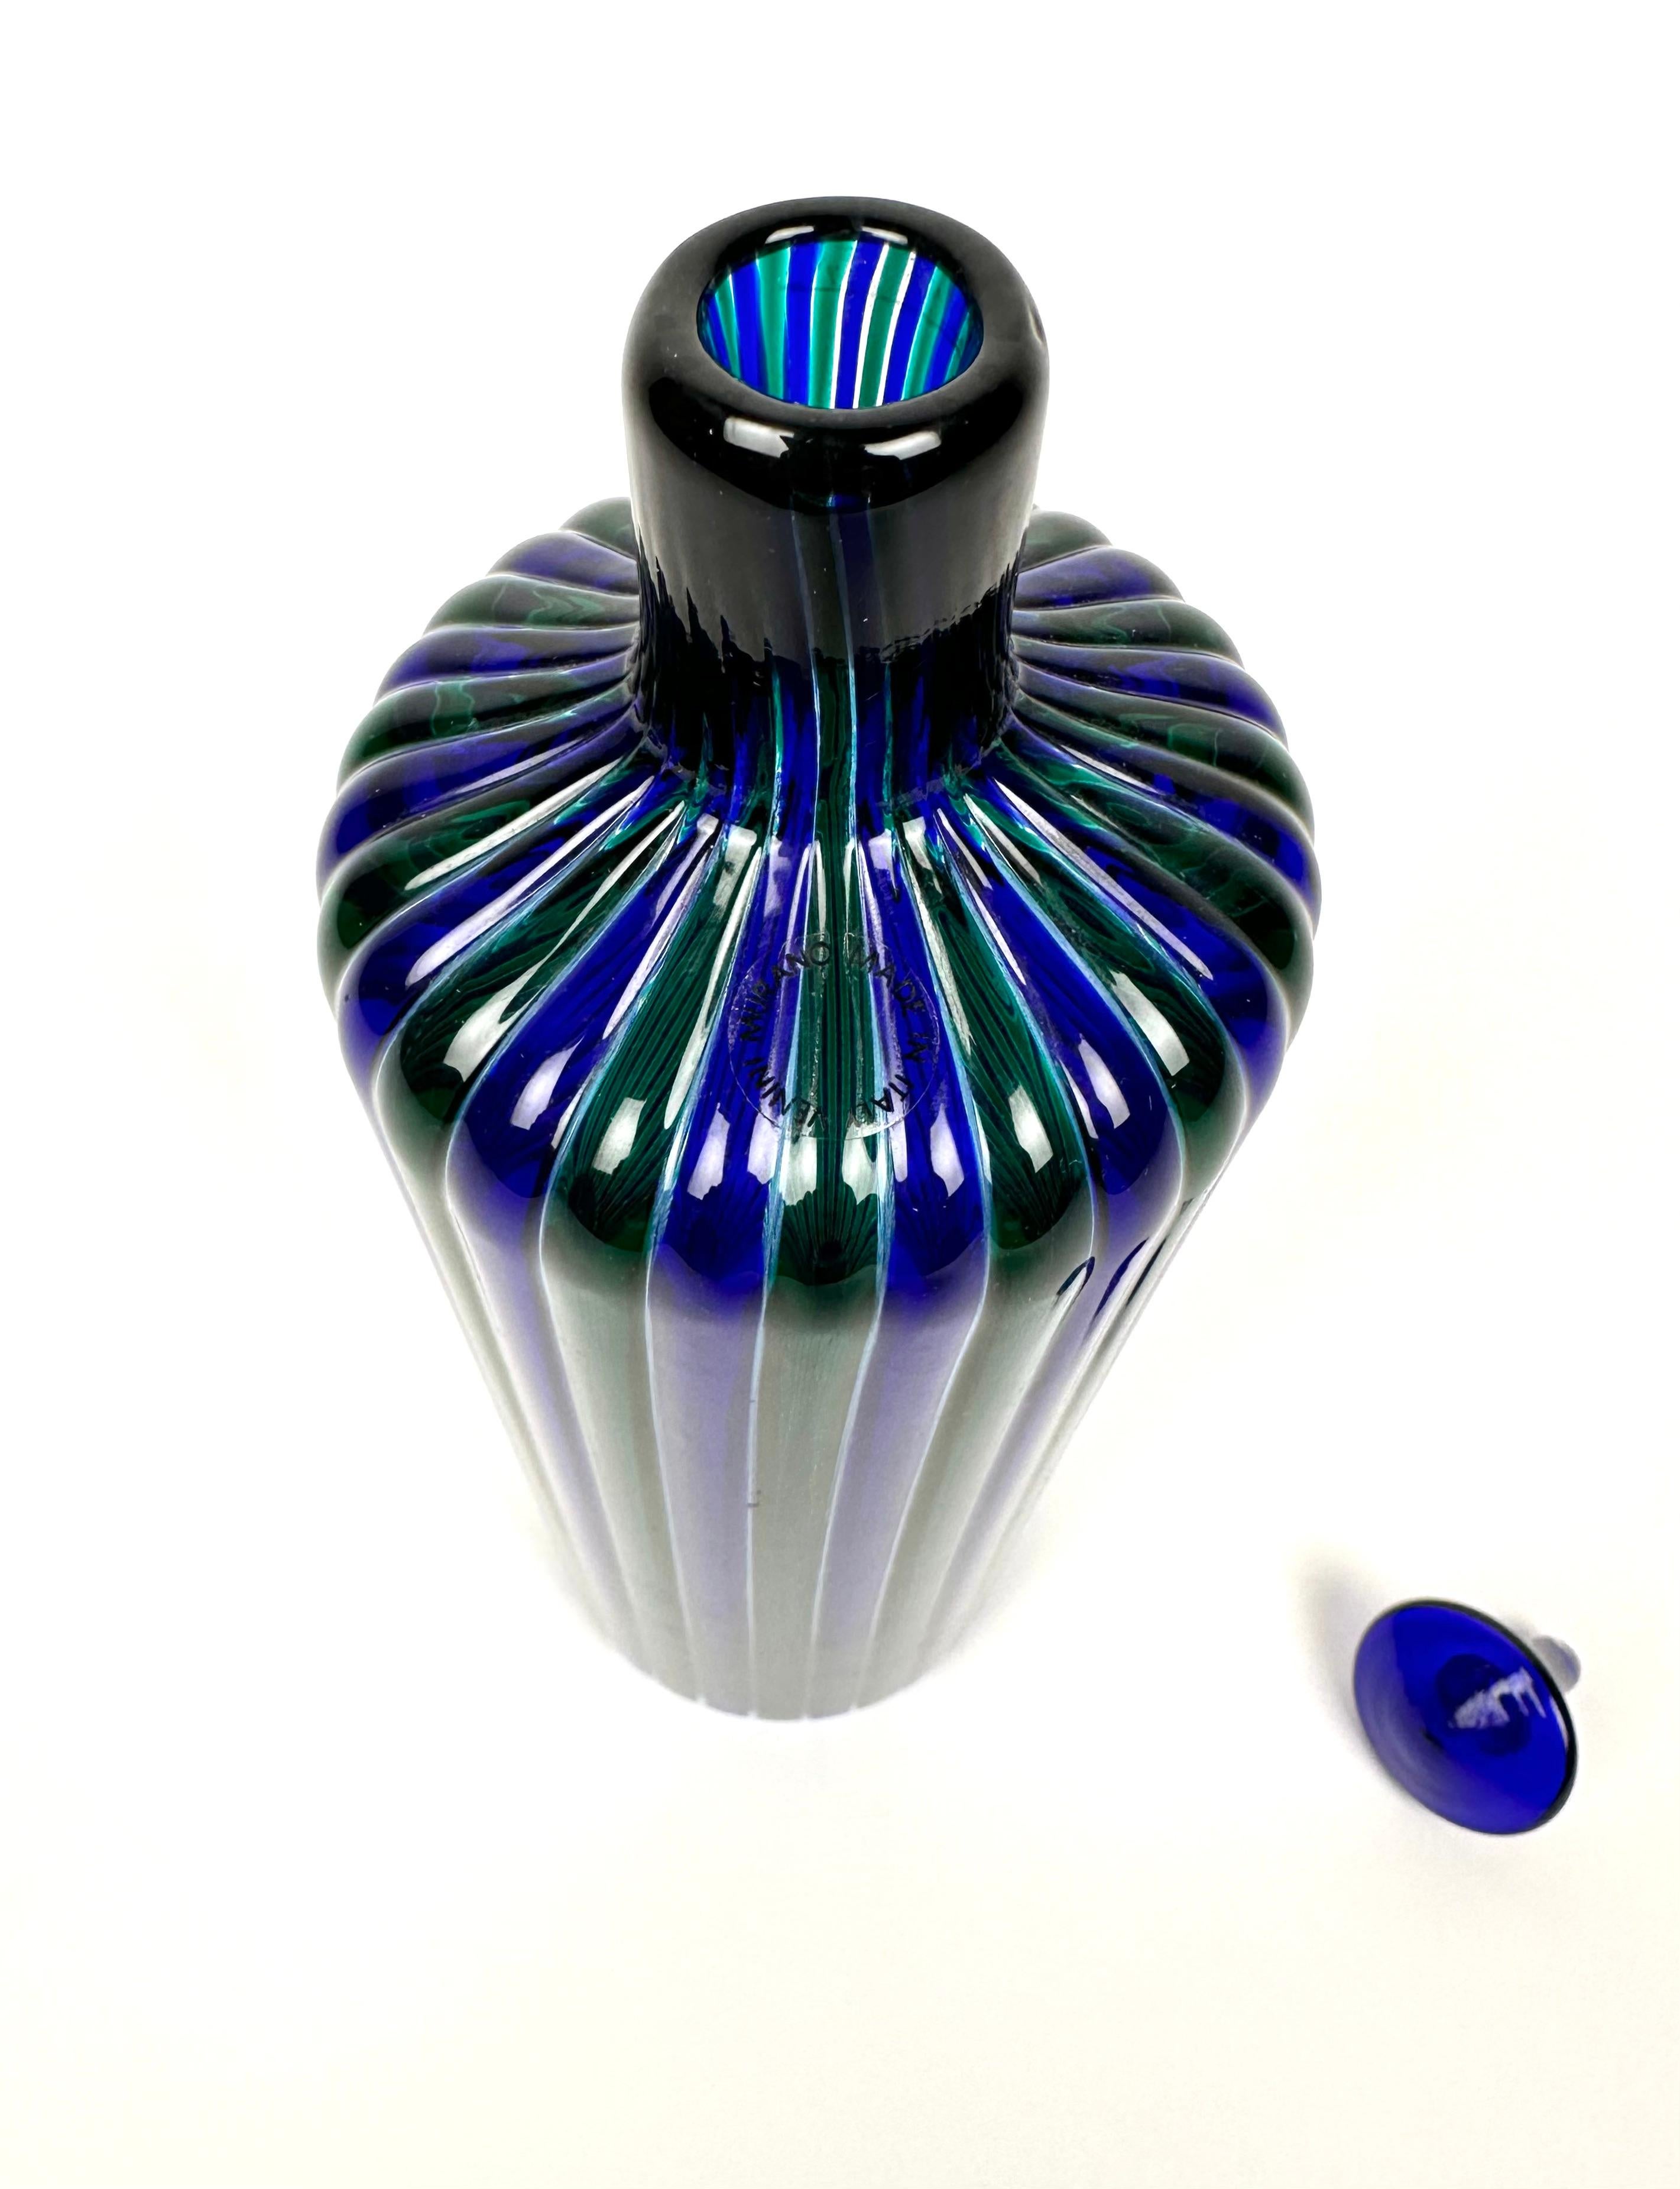 Italian Blue and Green Murano Glass Bottle by Fulvio Bianconi for Venini, Italy 1988 For Sale